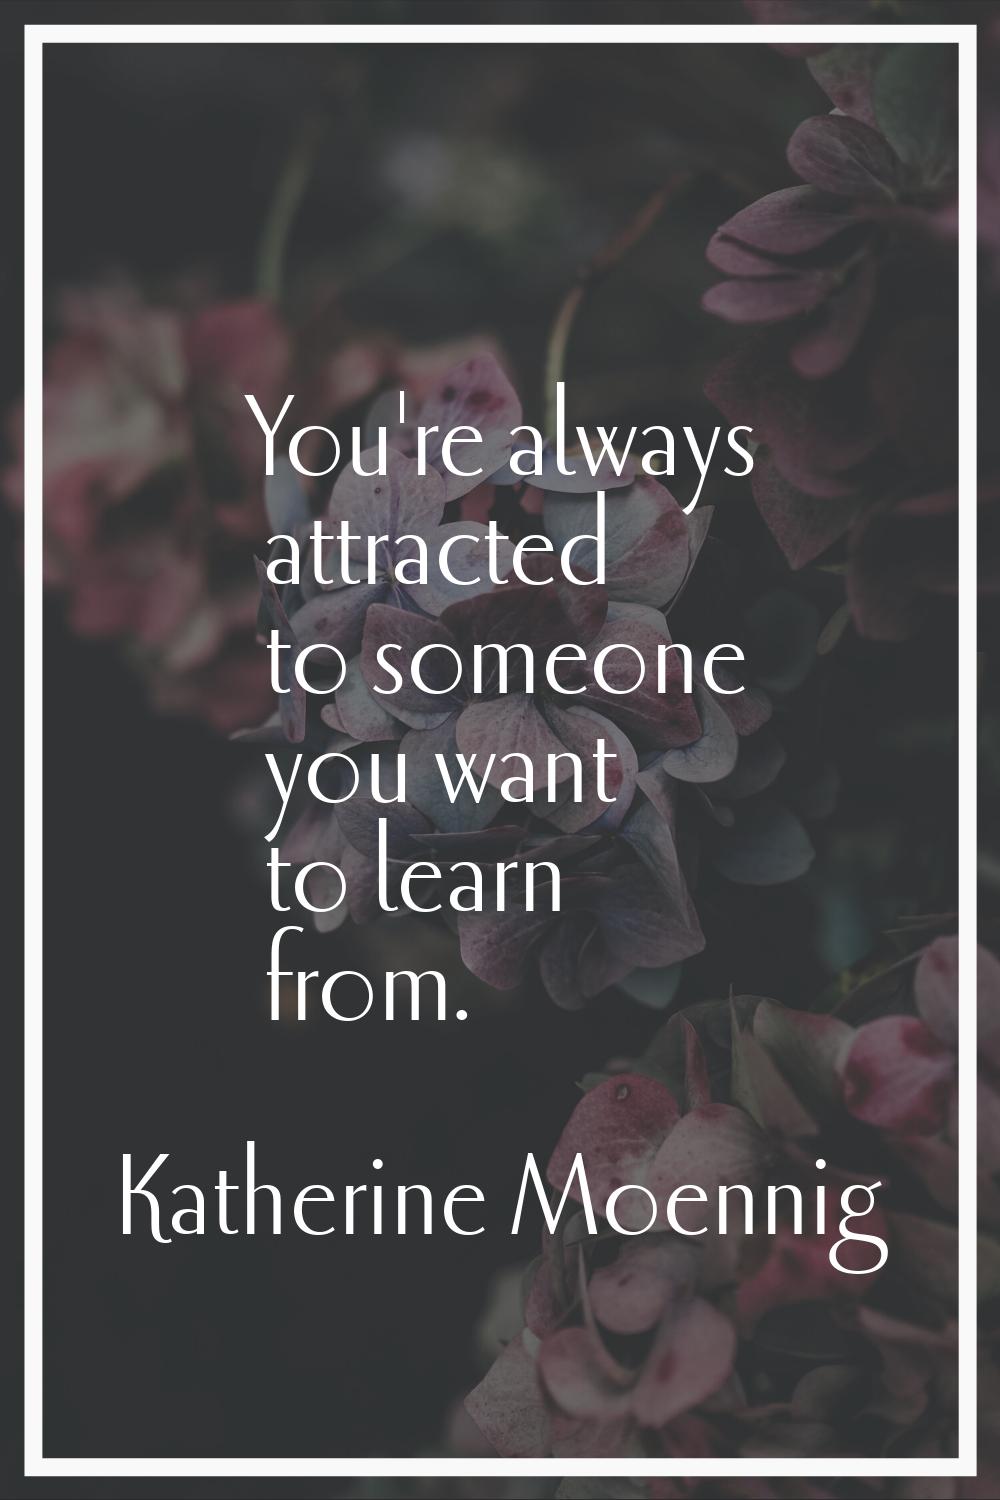 You're always attracted to someone you want to learn from.